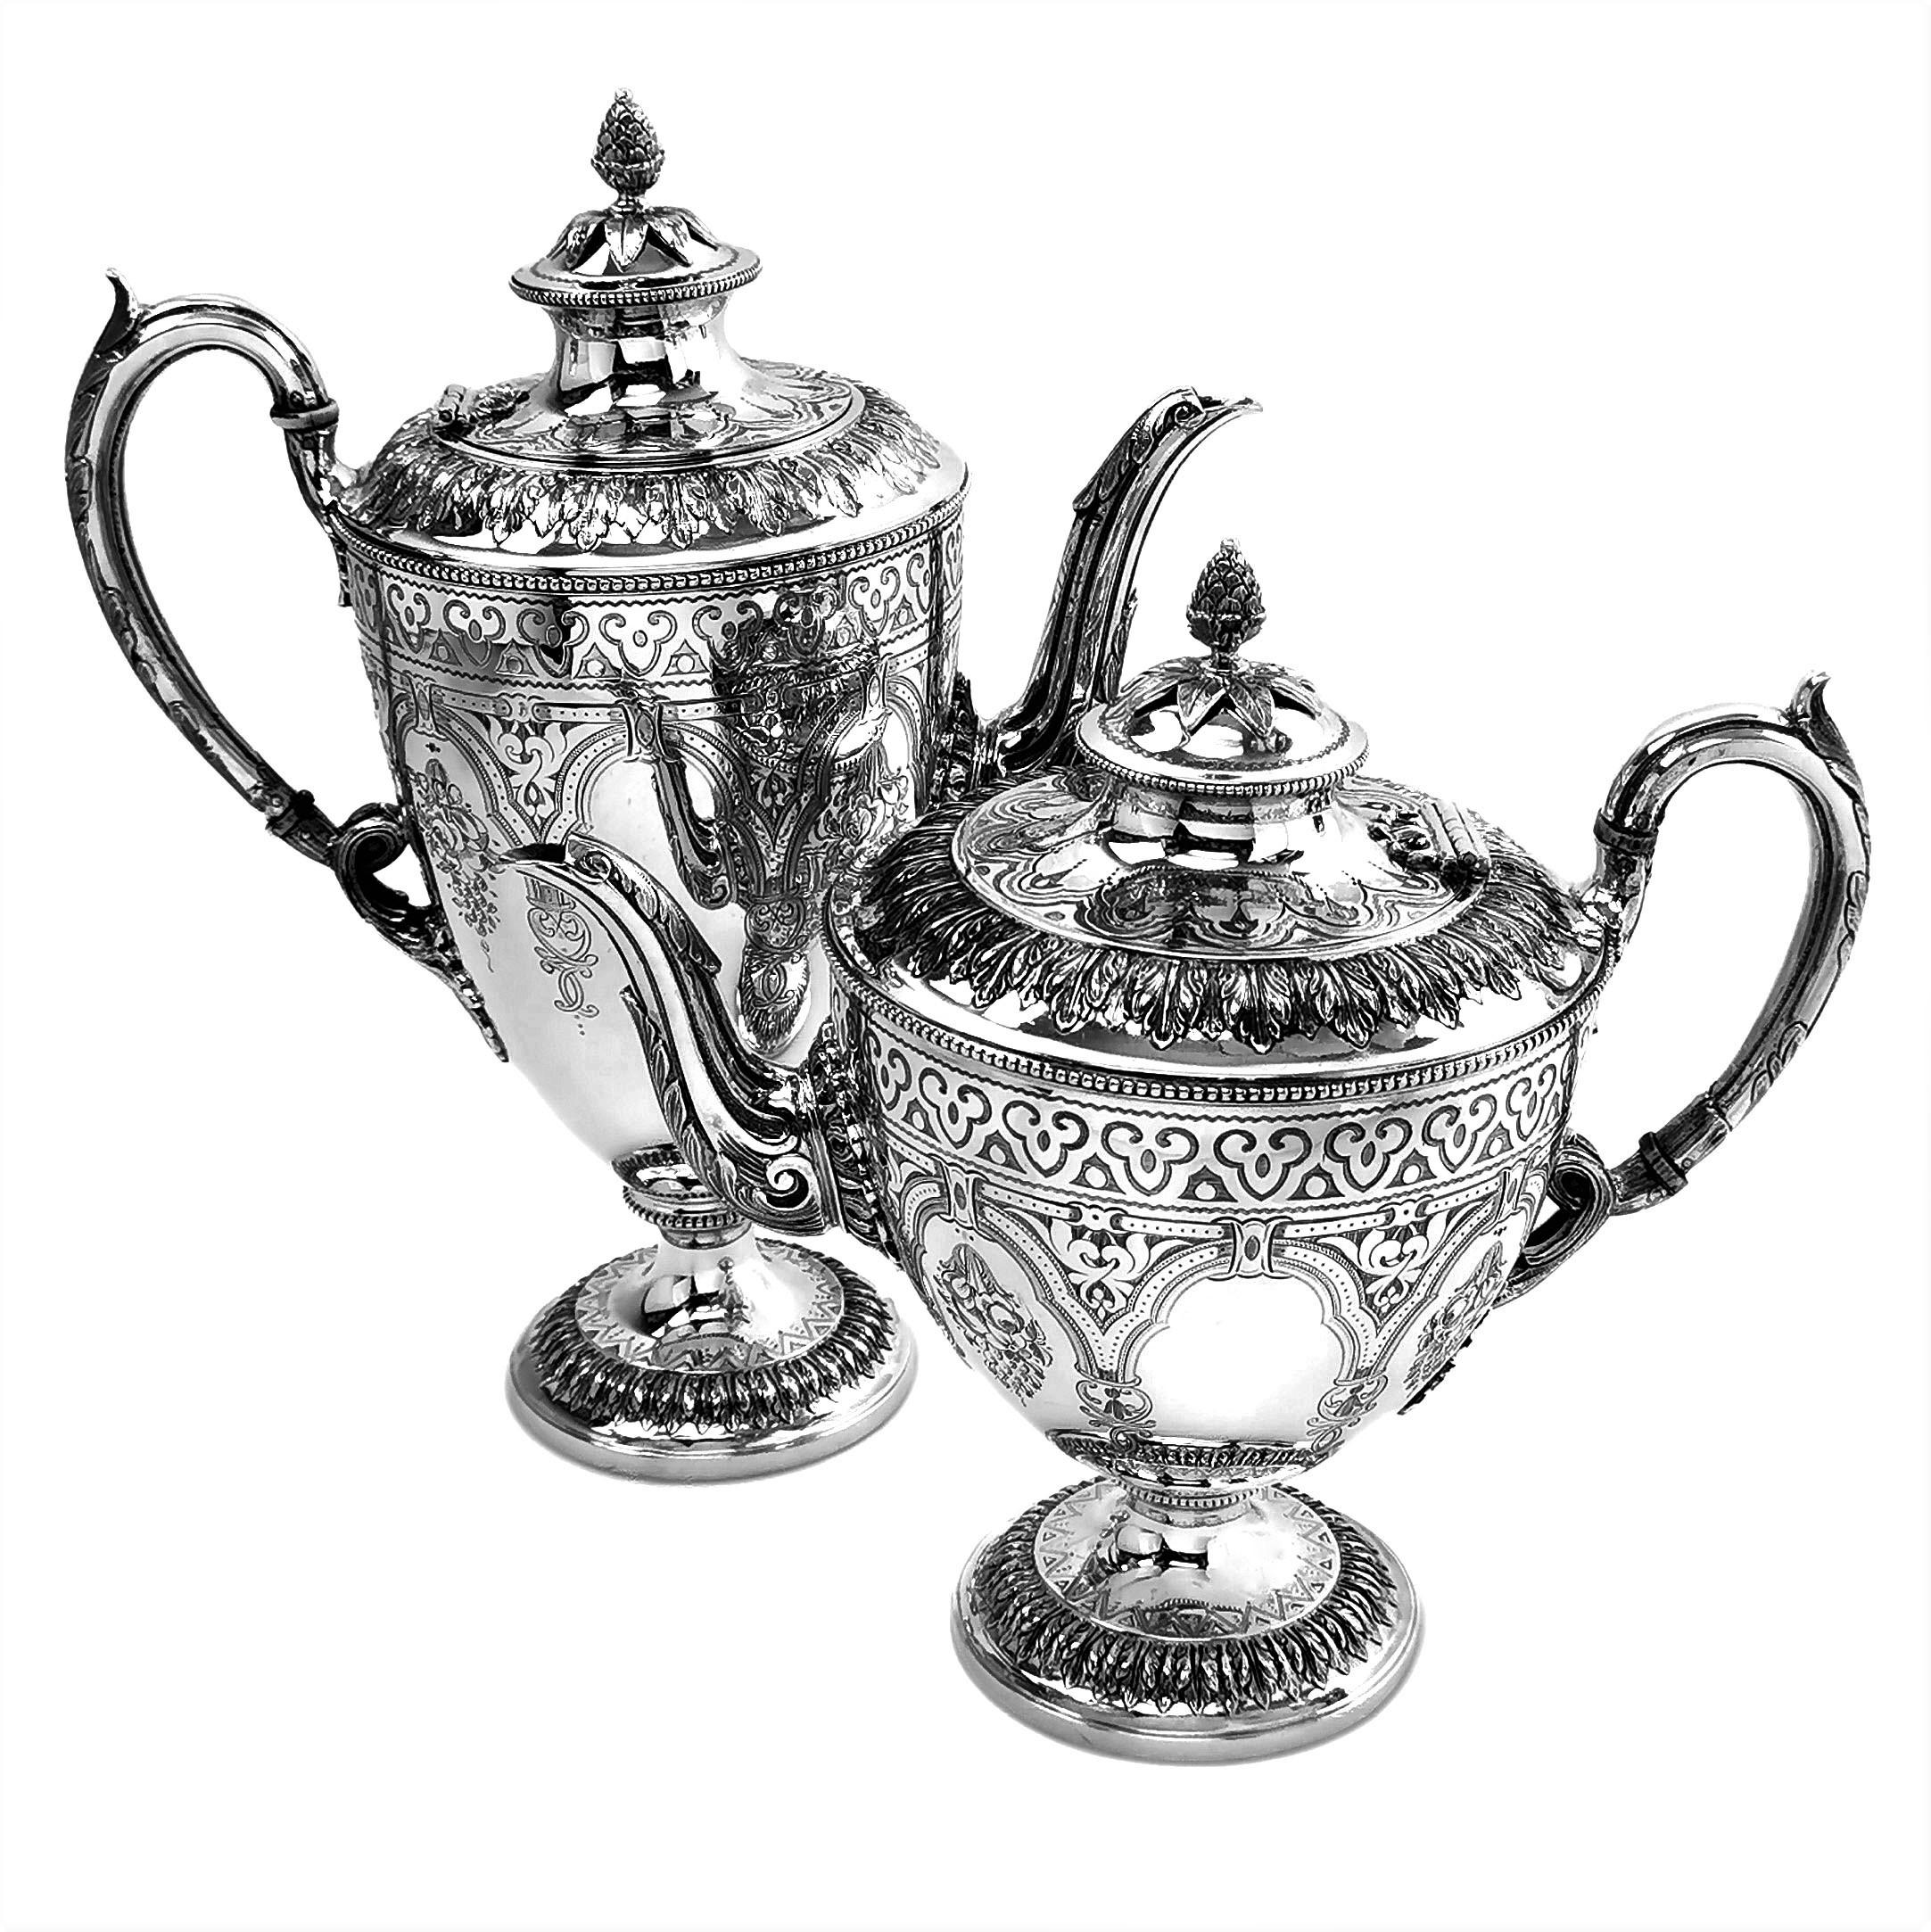 Antique Victorian 5 Piece Silver Tea and Coffee Set with Kettle, 1881 / 82 For Sale 2